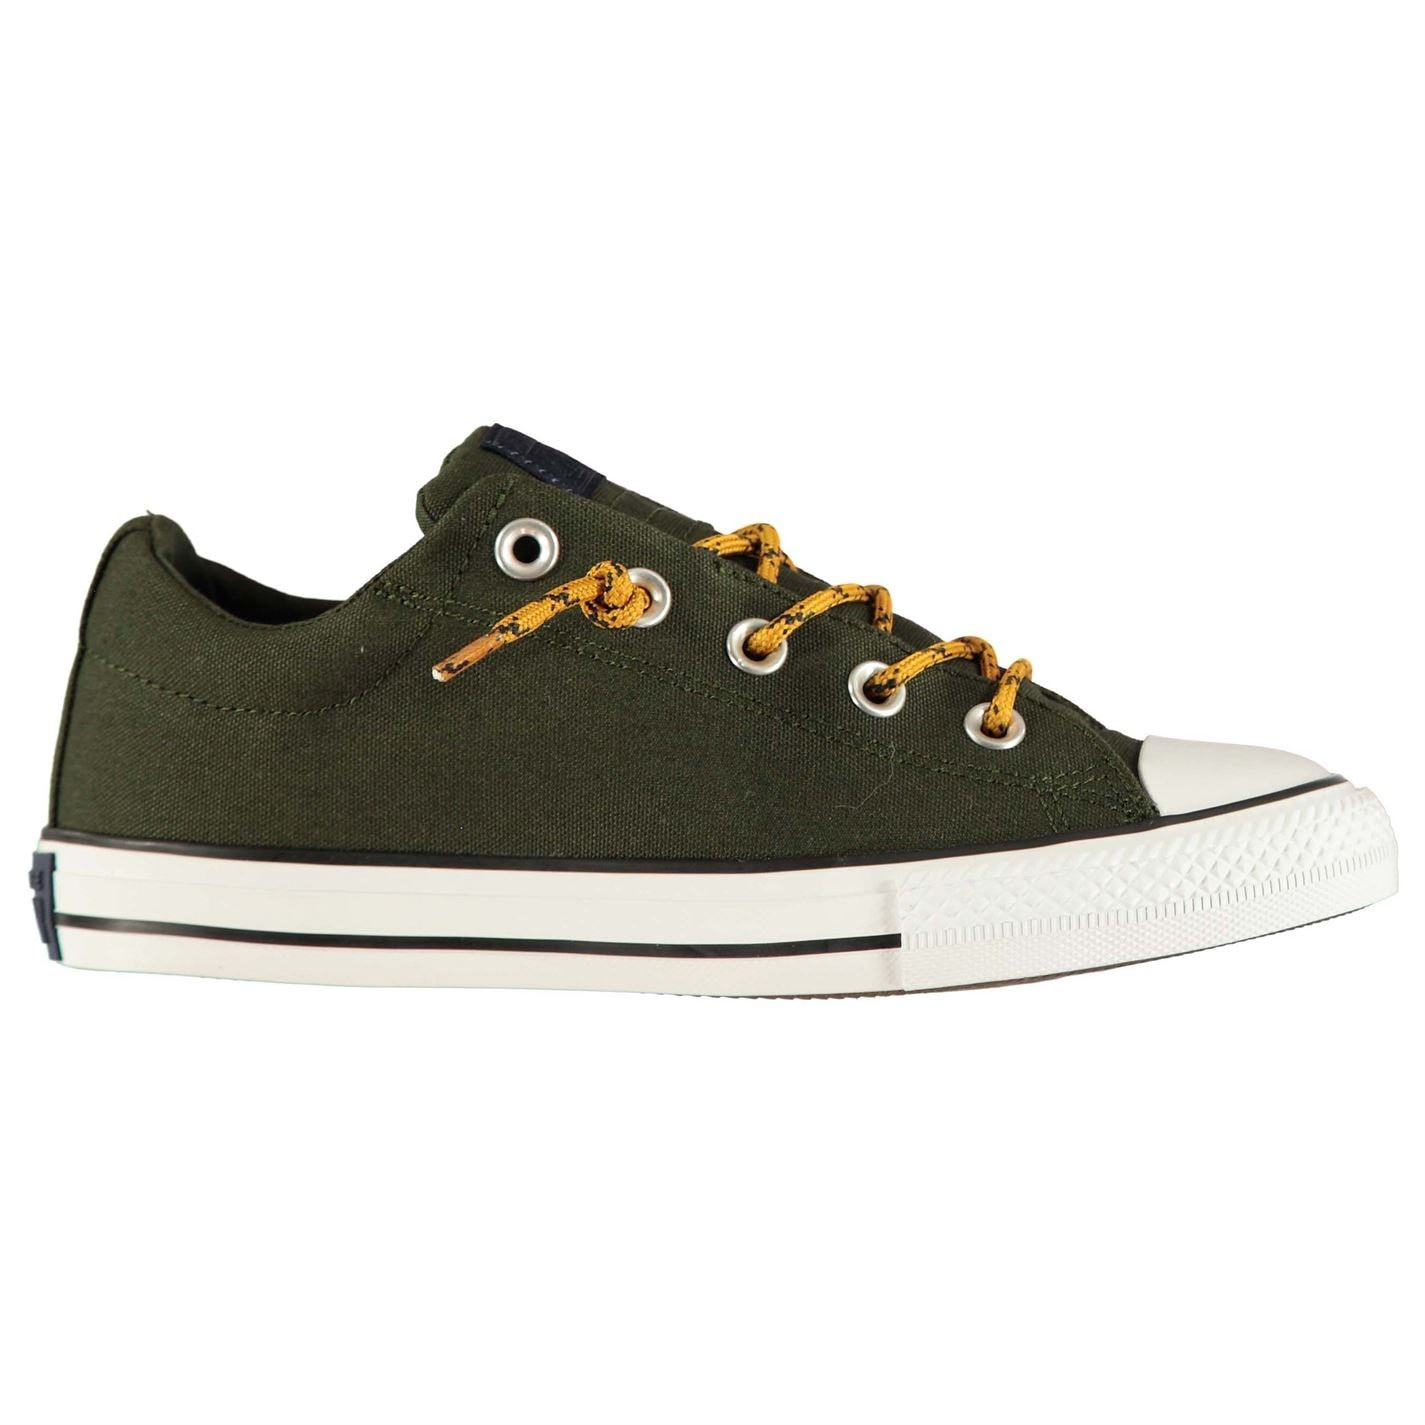 Converse Chuck Taylor All Star Ox Trainers Velikost: 5 (38)